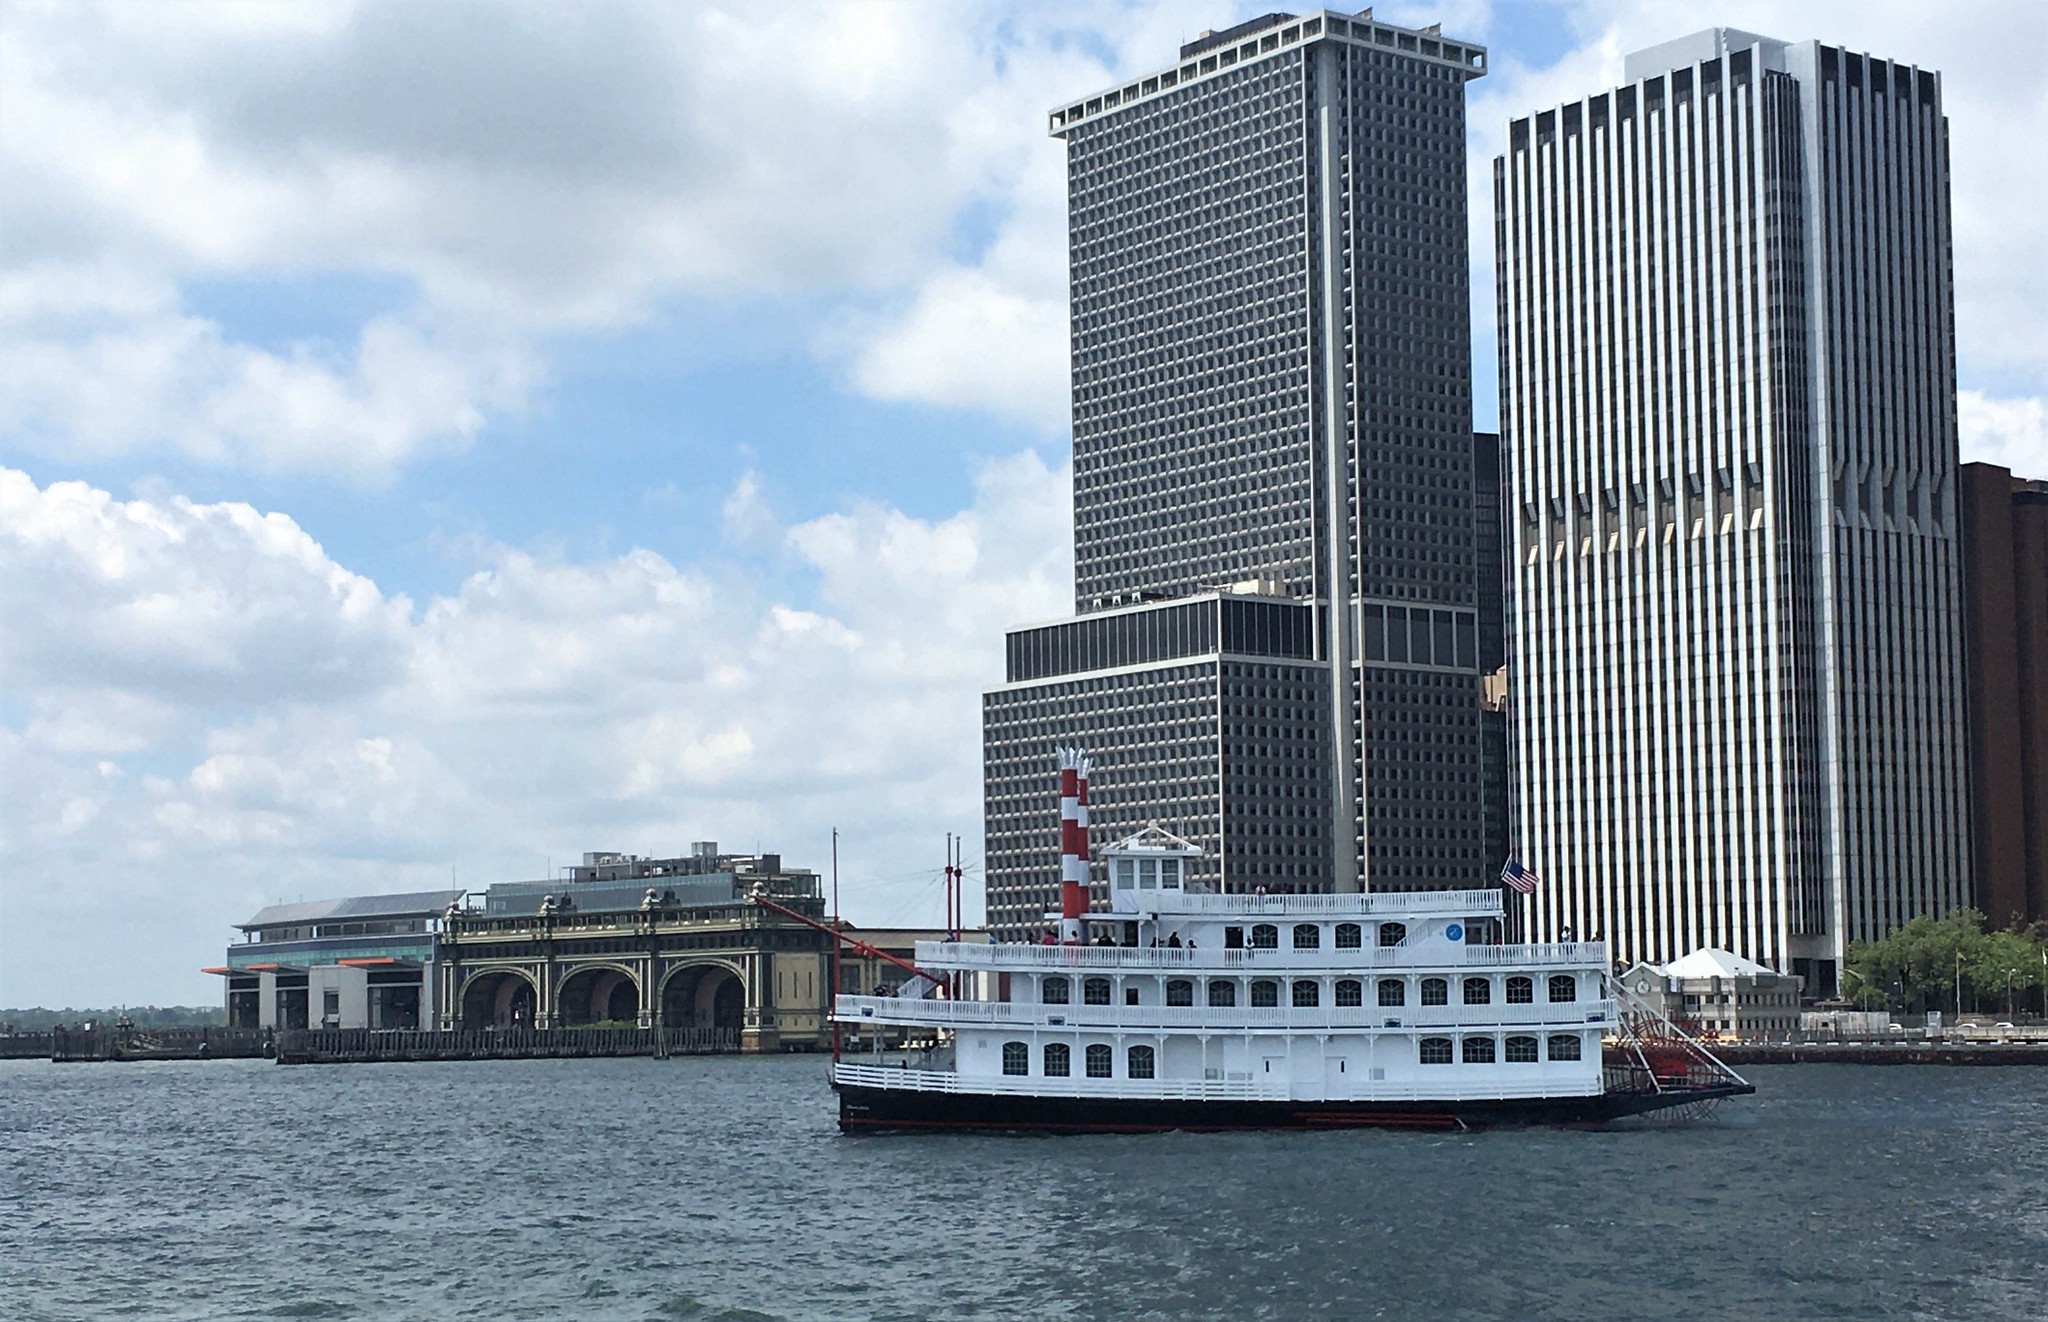 A photo of a "show boat"-style boat as seen on the East River in Lower Manhattan.